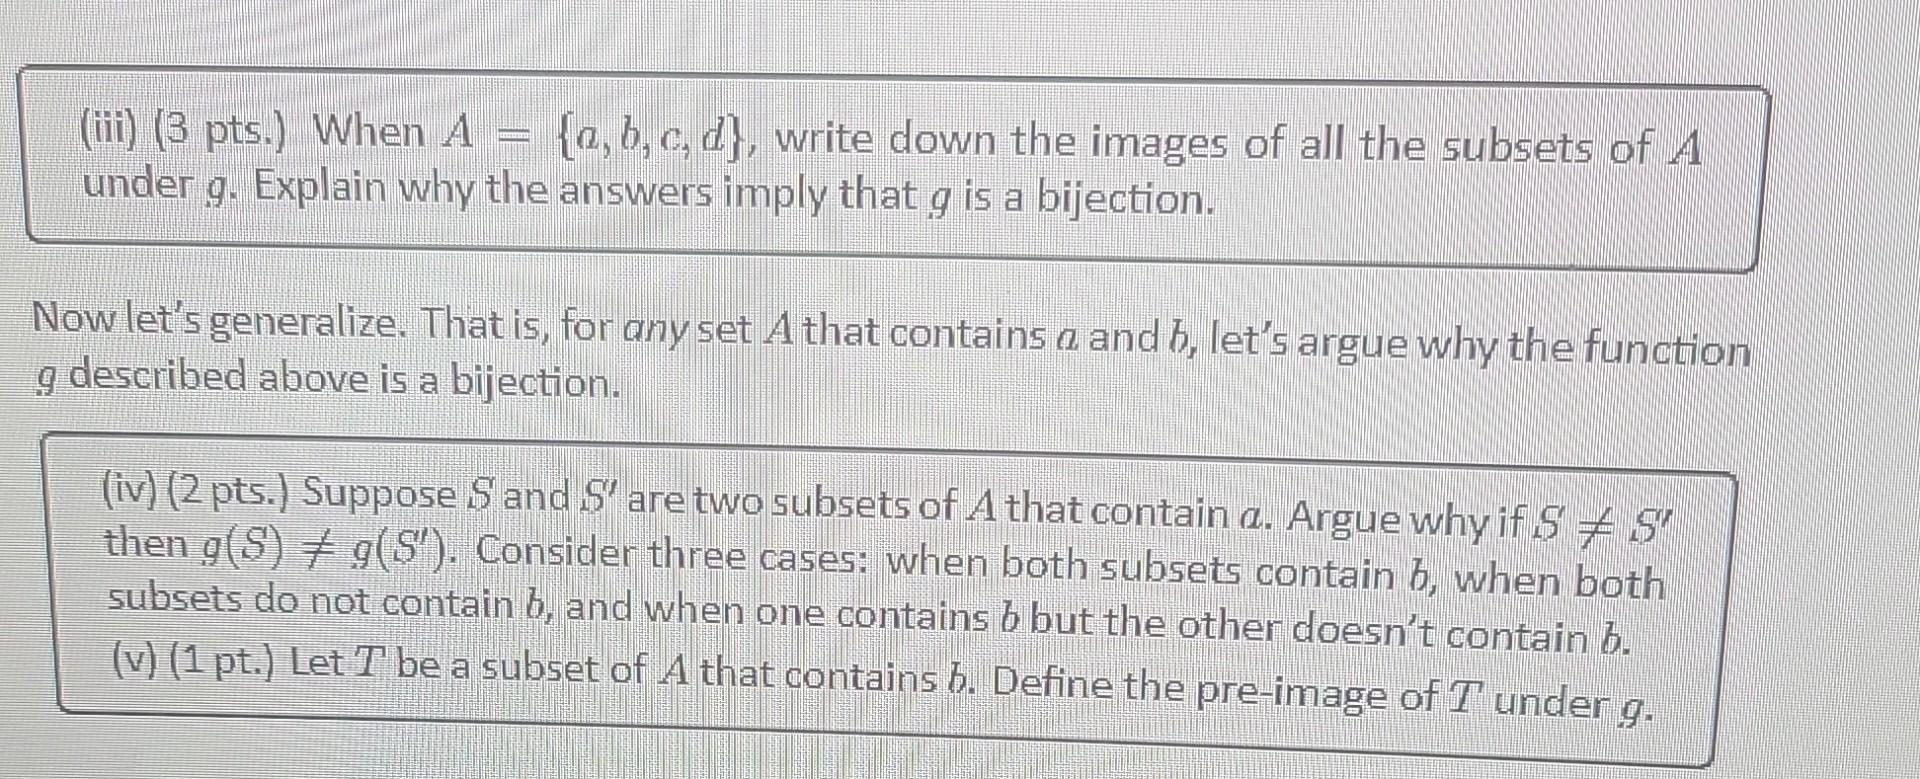 (iii) (3 pts.) When A = {a, b, c, d), write down the images of all the subsets of A under g. Explain why the